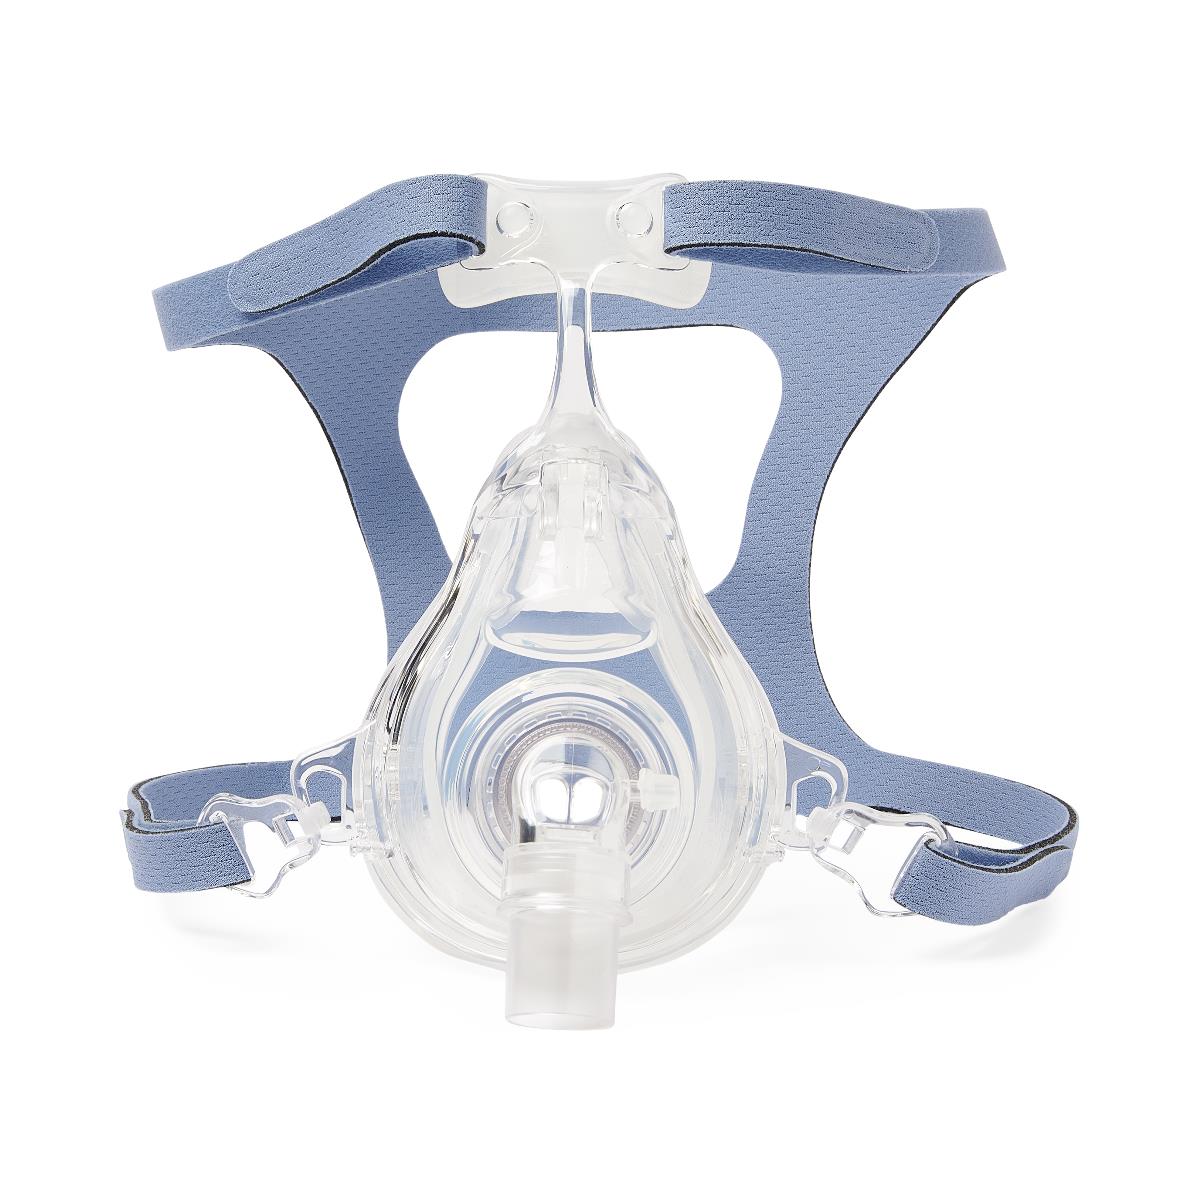 Image of NIV Full-Face Mask with Headgear, Antiasphyxia Valve, Nonvented, Size L